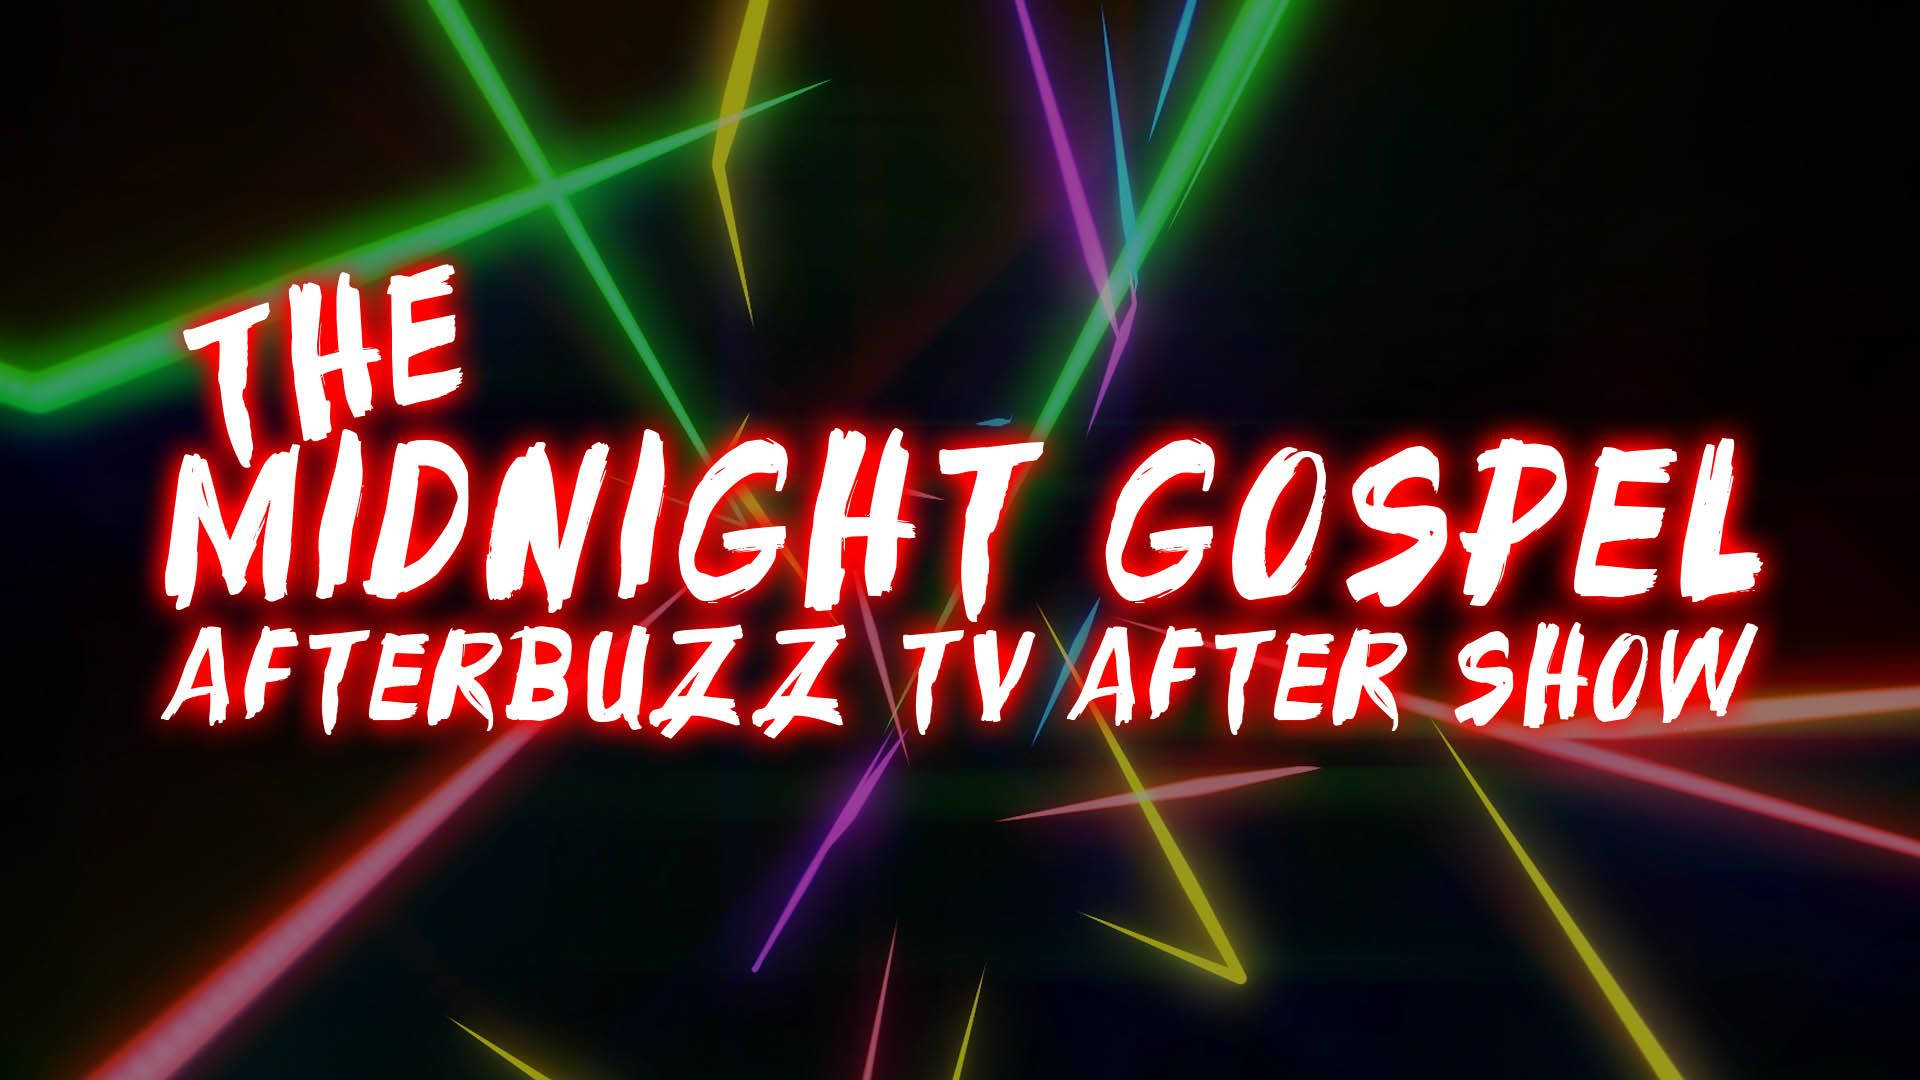 The Midnight Gospel Afterbuzz Show Background